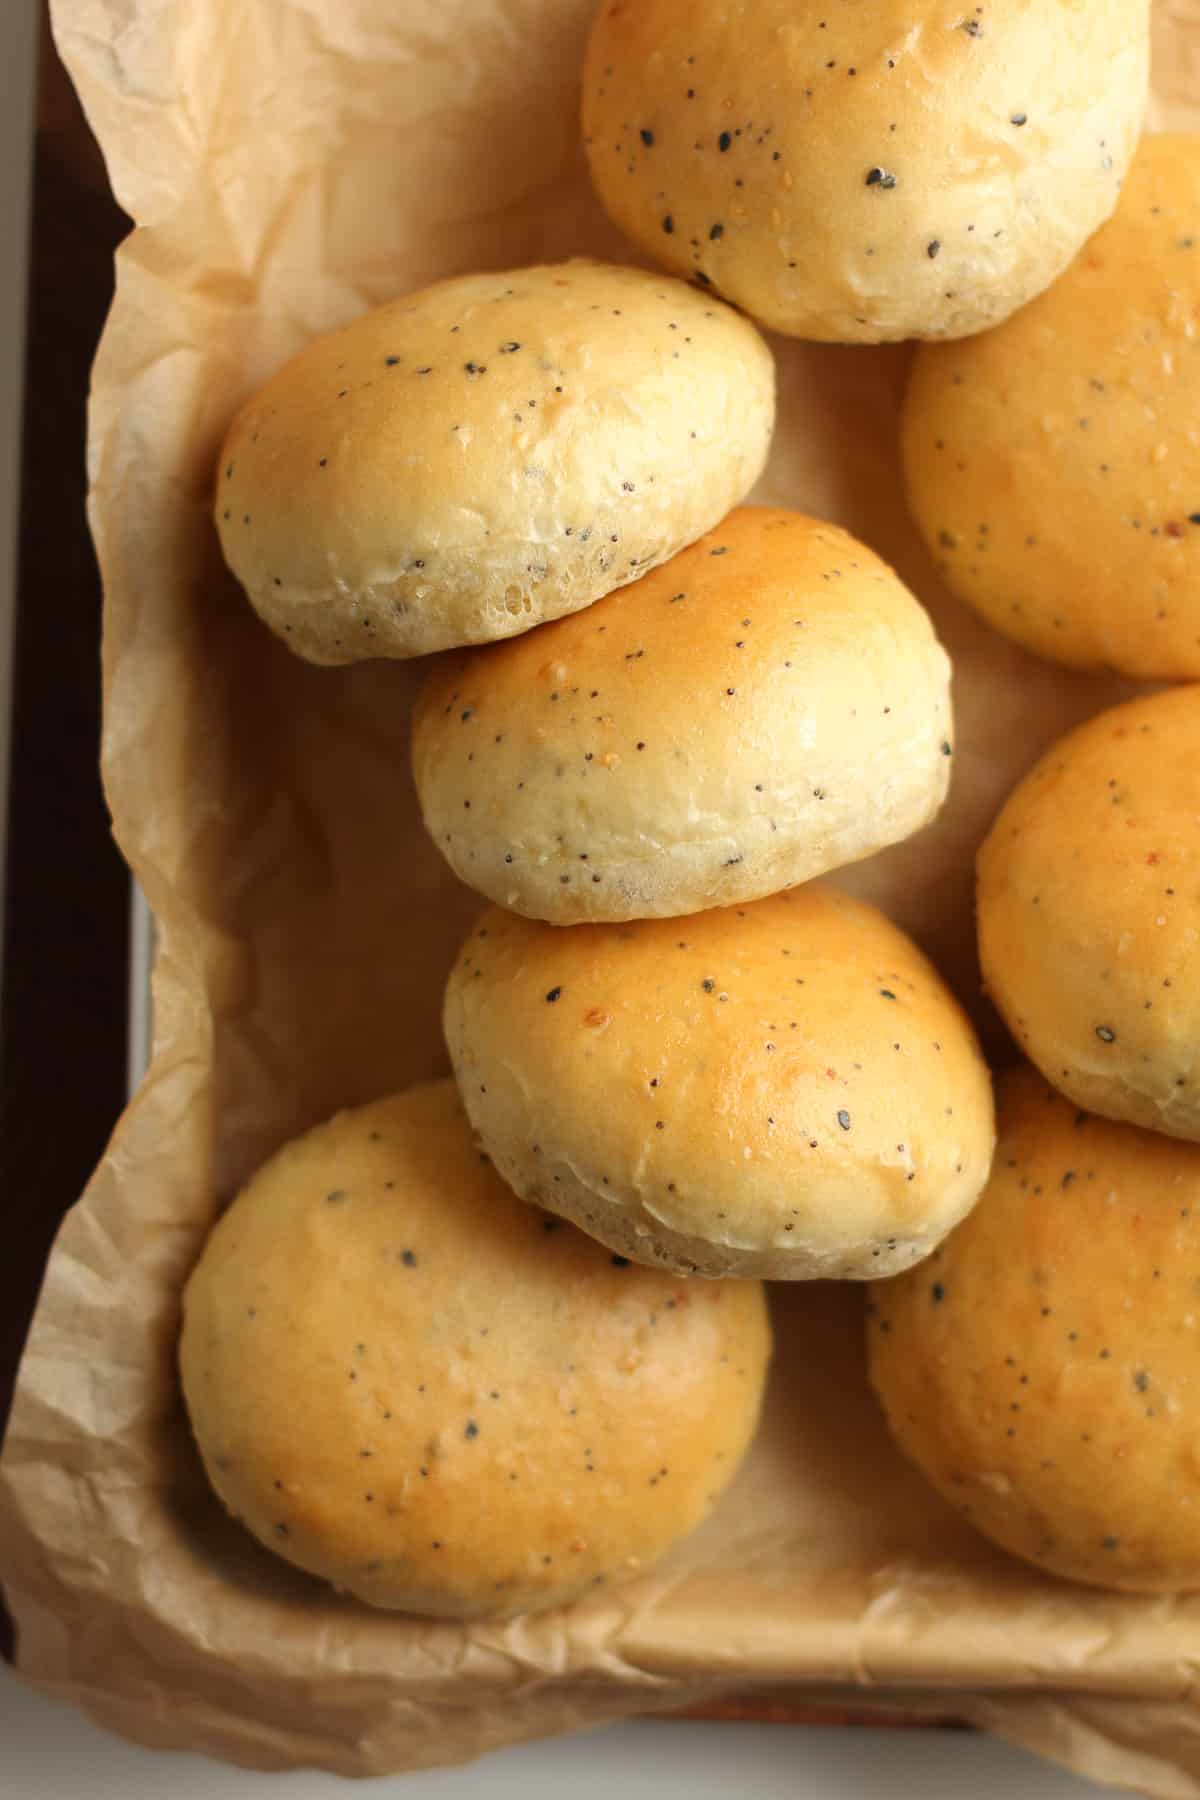 A pan of the bagel rolls.